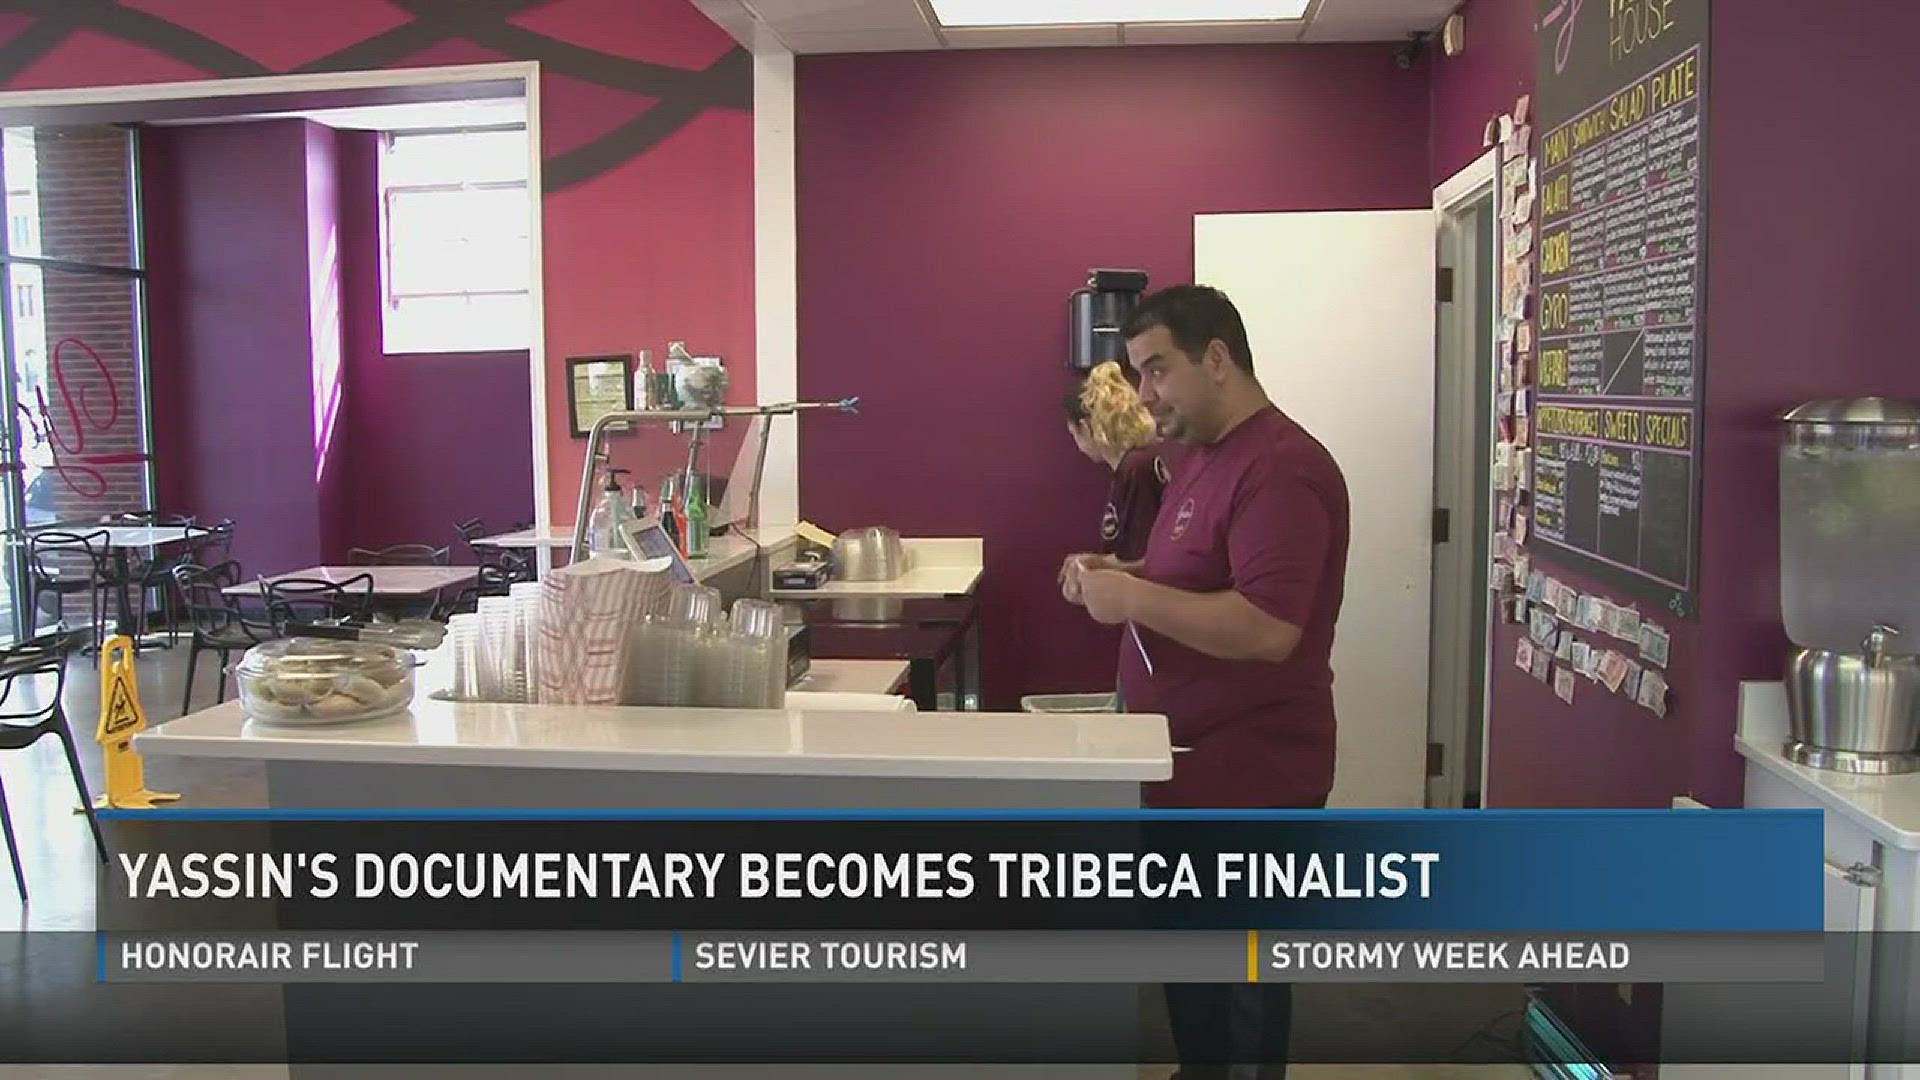 April 4, 2017: A documentary featuring a Knoxville restaurant owner and former Syrian refugee is a finalist for the Tribeca X Award at the Tribeca Film Festival.